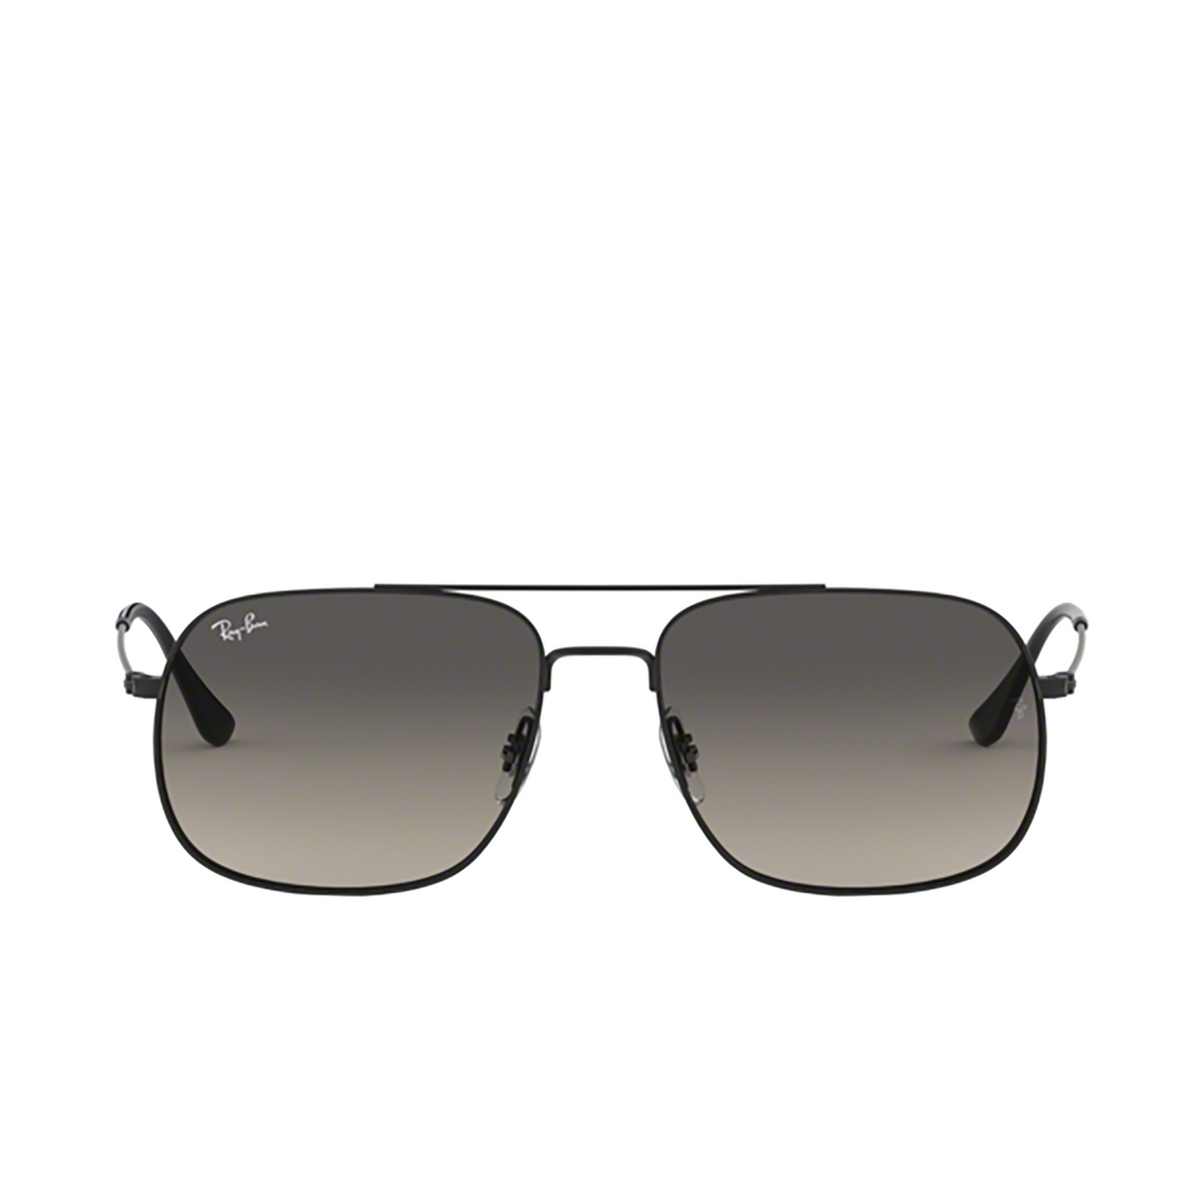 Ray-Ban ANDREA Sunglasses 901411 RUBBER BLACK - front view